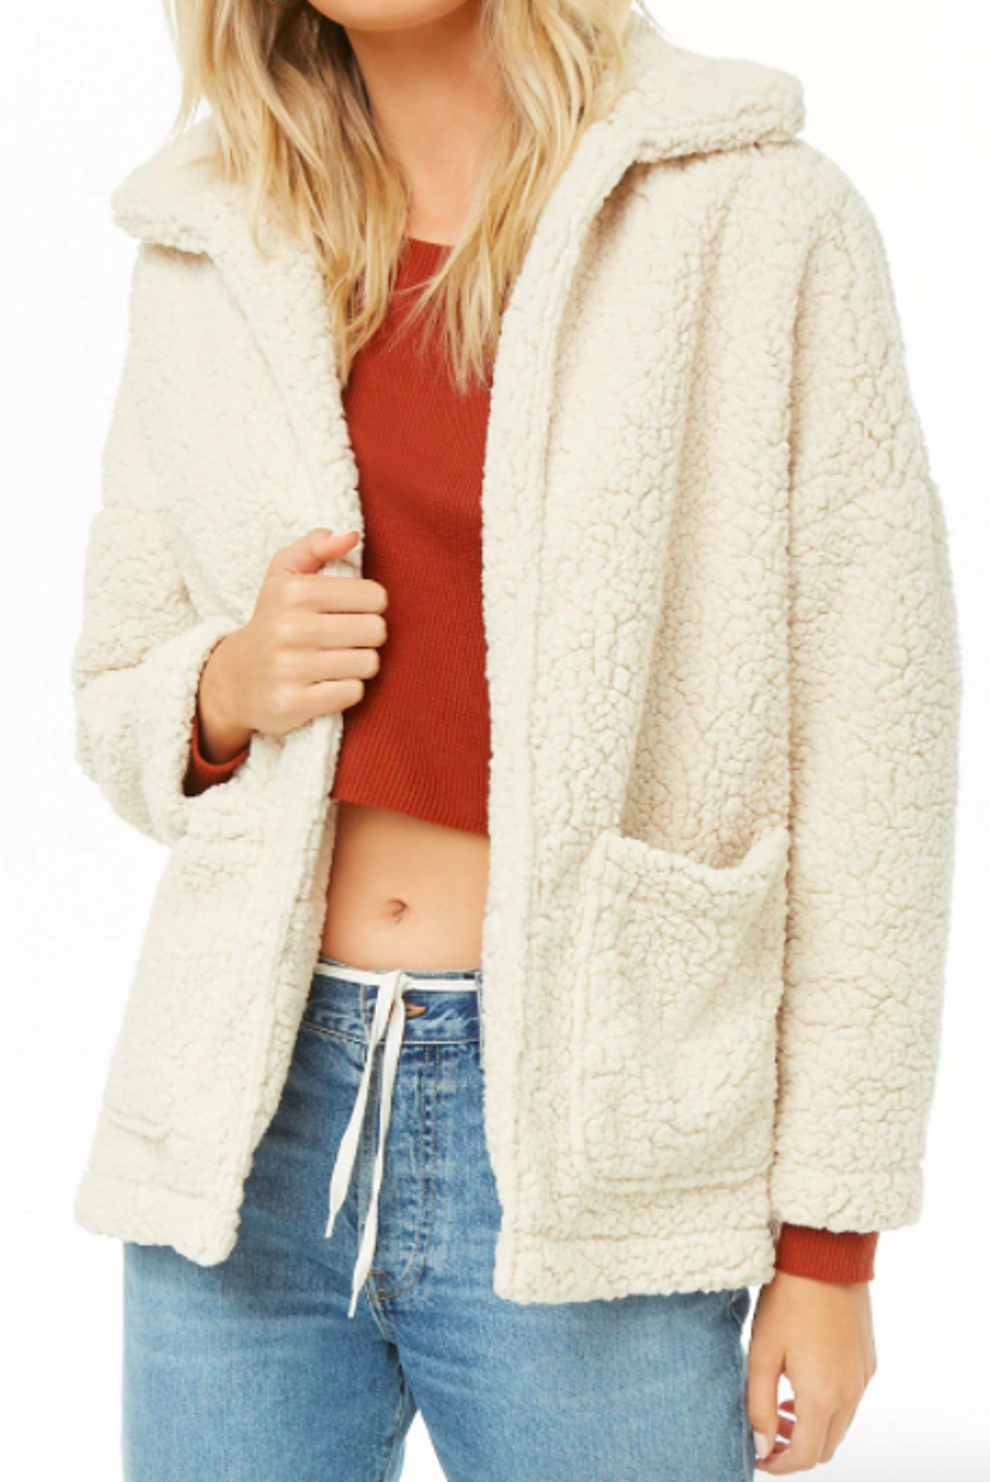 35 Pieces Of Clothing You'll Want To Live In This Fall